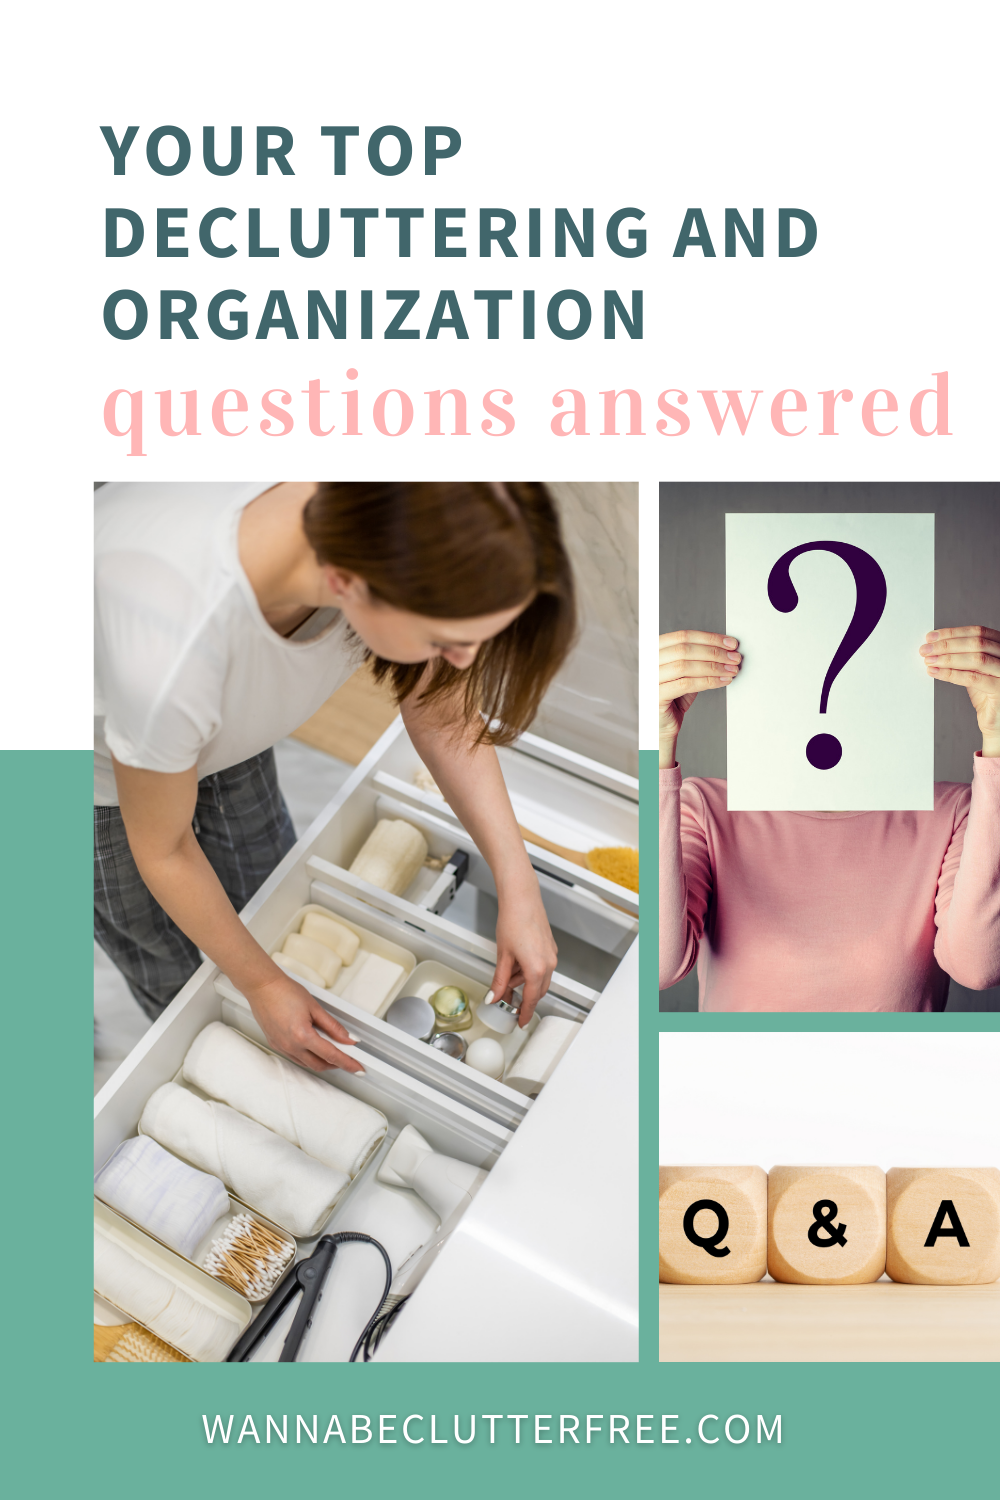 Your top decluttering and organization questions answered